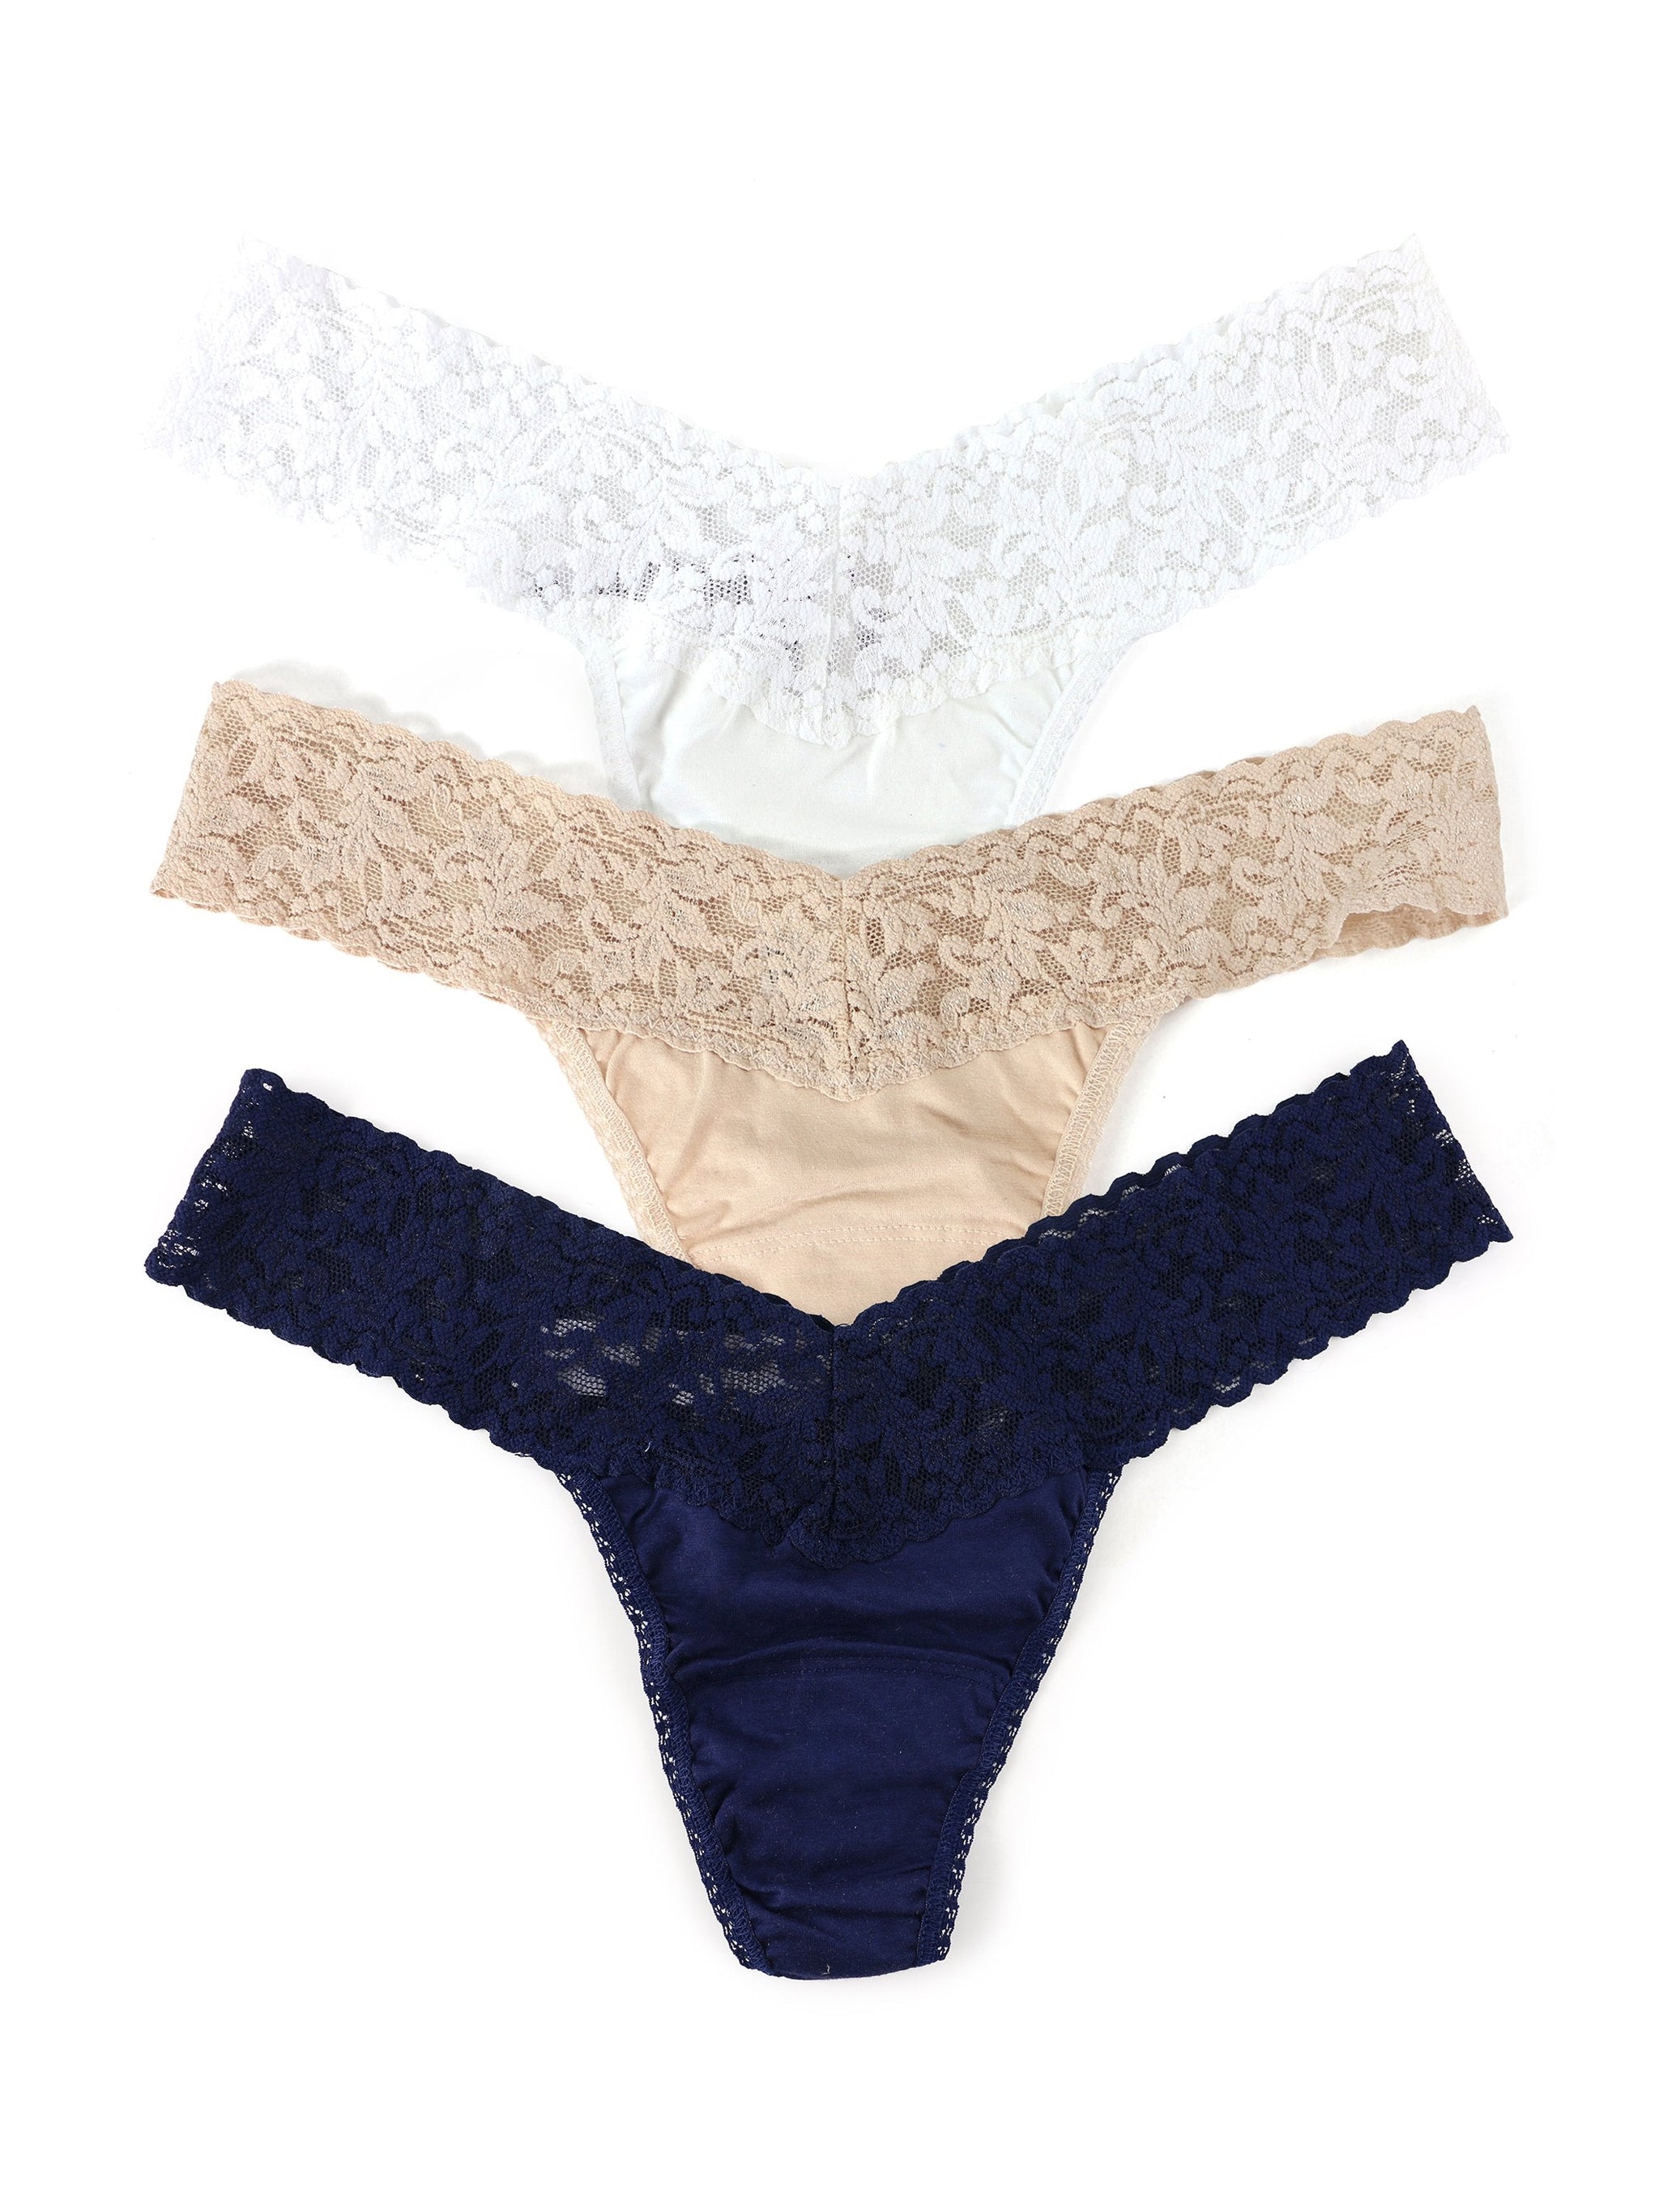 https://www.hankypanky.com/cdn/shop/files/Hanky-Panky-3-Pack-Supimar-Cotton-Low-Rise-Thongs-with-Lace-WhiteChaiNavy-CHAI-WHITE-NAVY-View-1.jpg?v=1698352211&width=2048